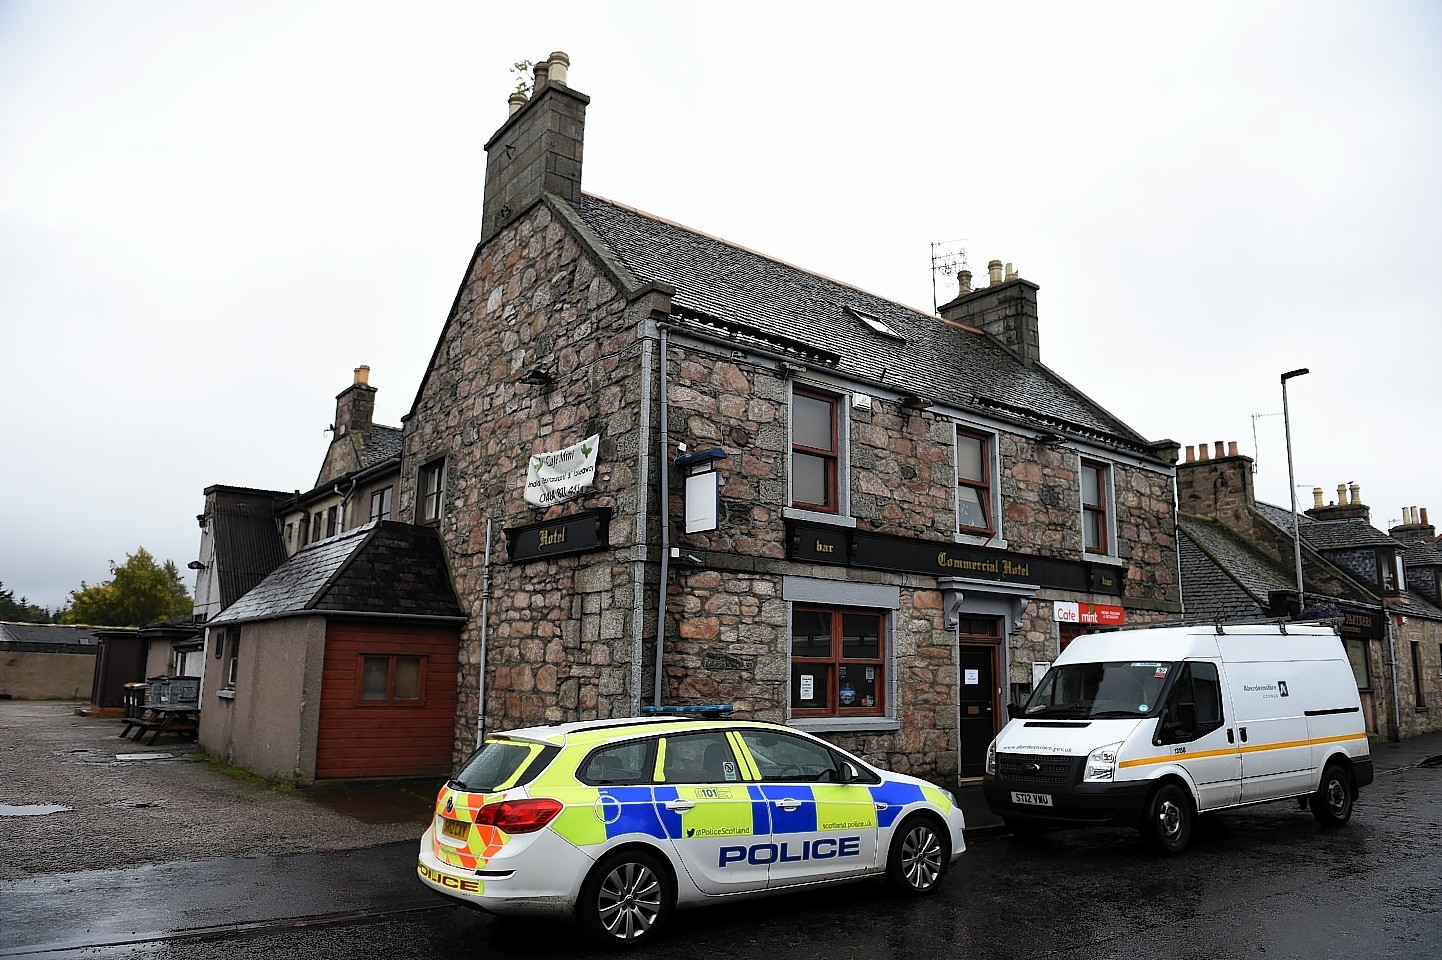 A woman has died after an incident at The Commercial Hotel on Commerce Street in Insch.